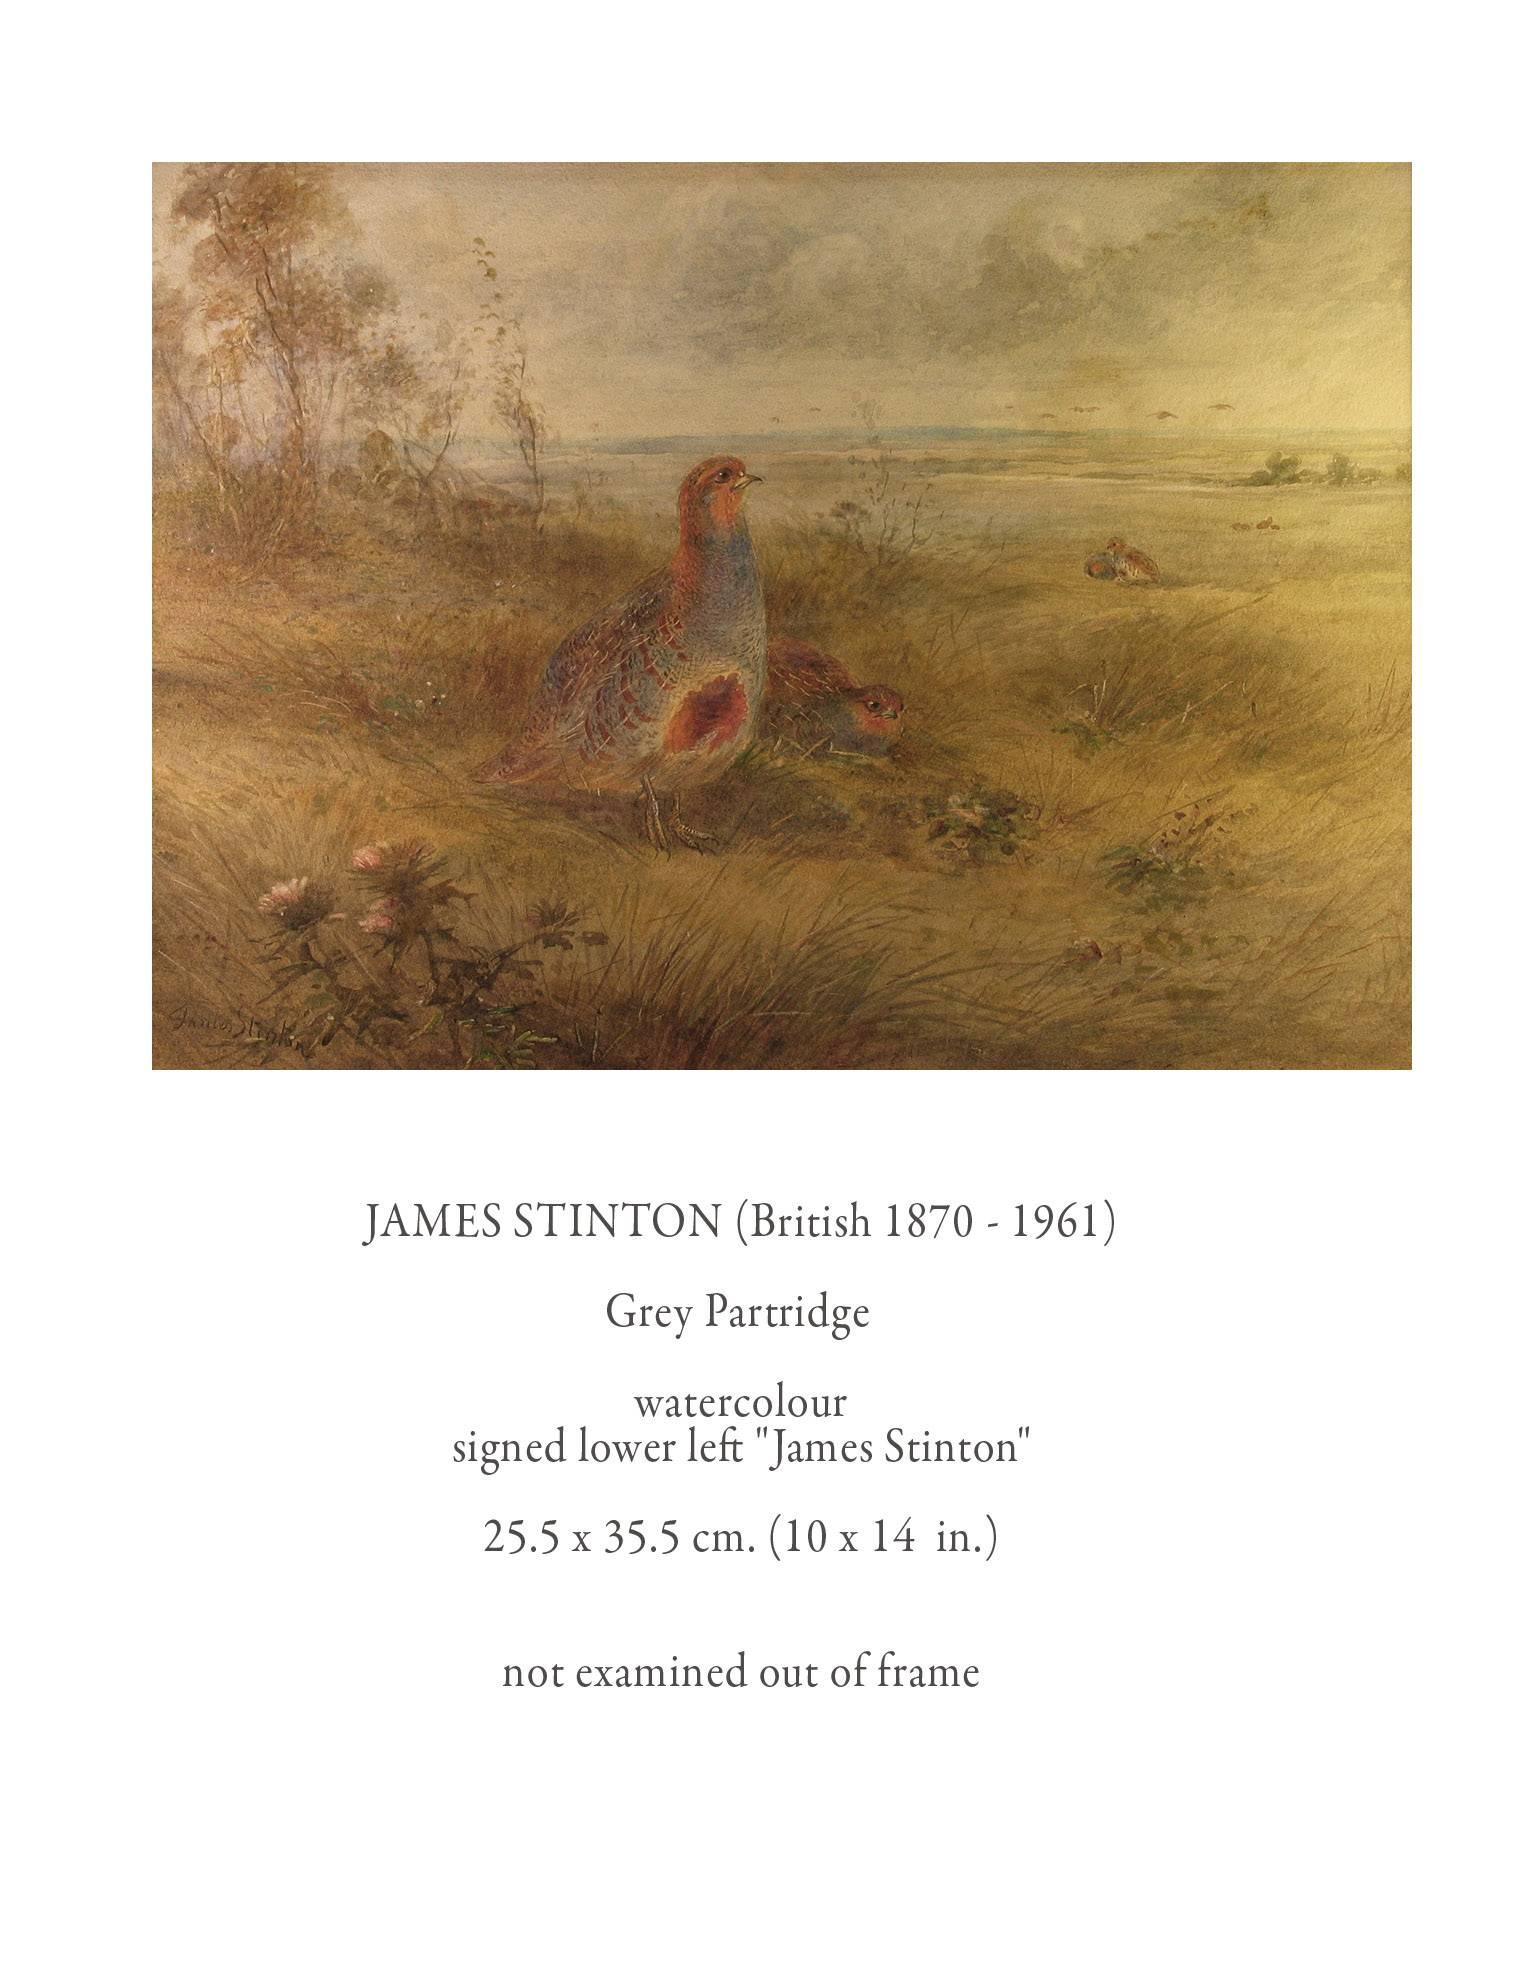 James Stinton "Grey Partridge" watercolor (British 1870-1961), Signed on the lower left, James Stinton, But not dated, mounted in a gold gilt frame, the watercolor measures 10" inches x 14" inches, The painting is of a partridge